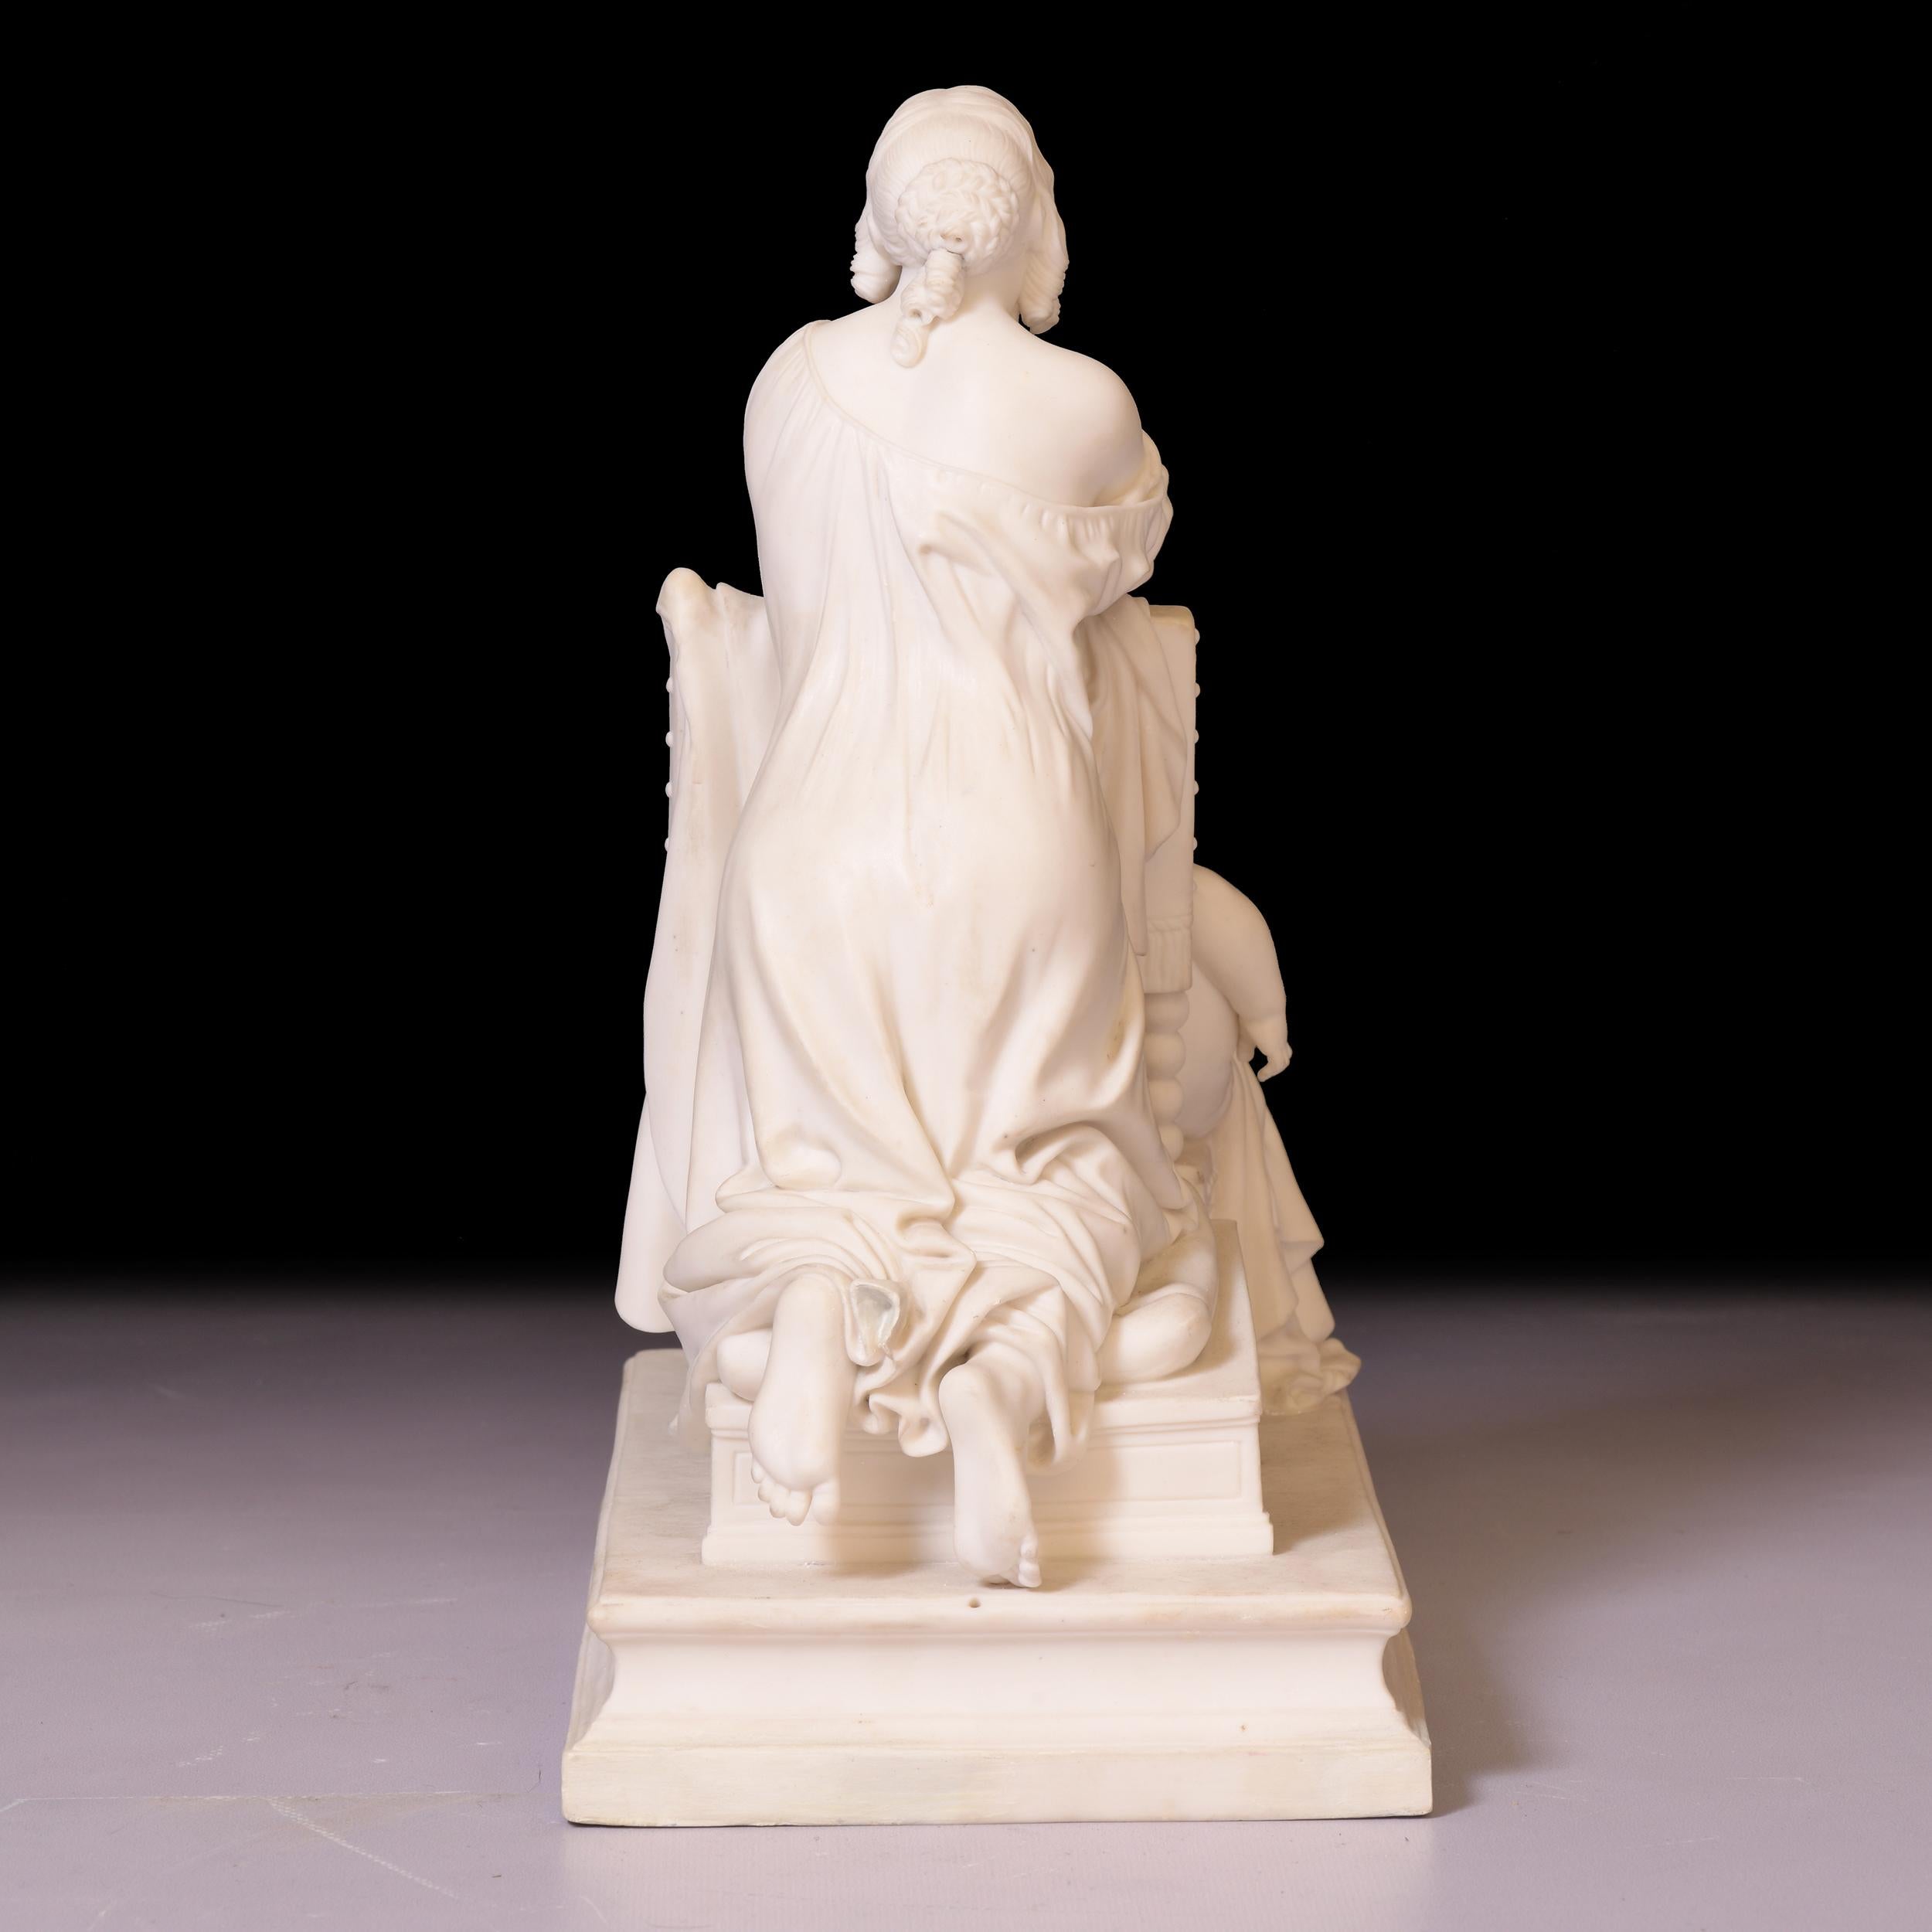 Porcelain 19th Century English Parian Group Of Mother & Child In Prayer By Minton For Sale